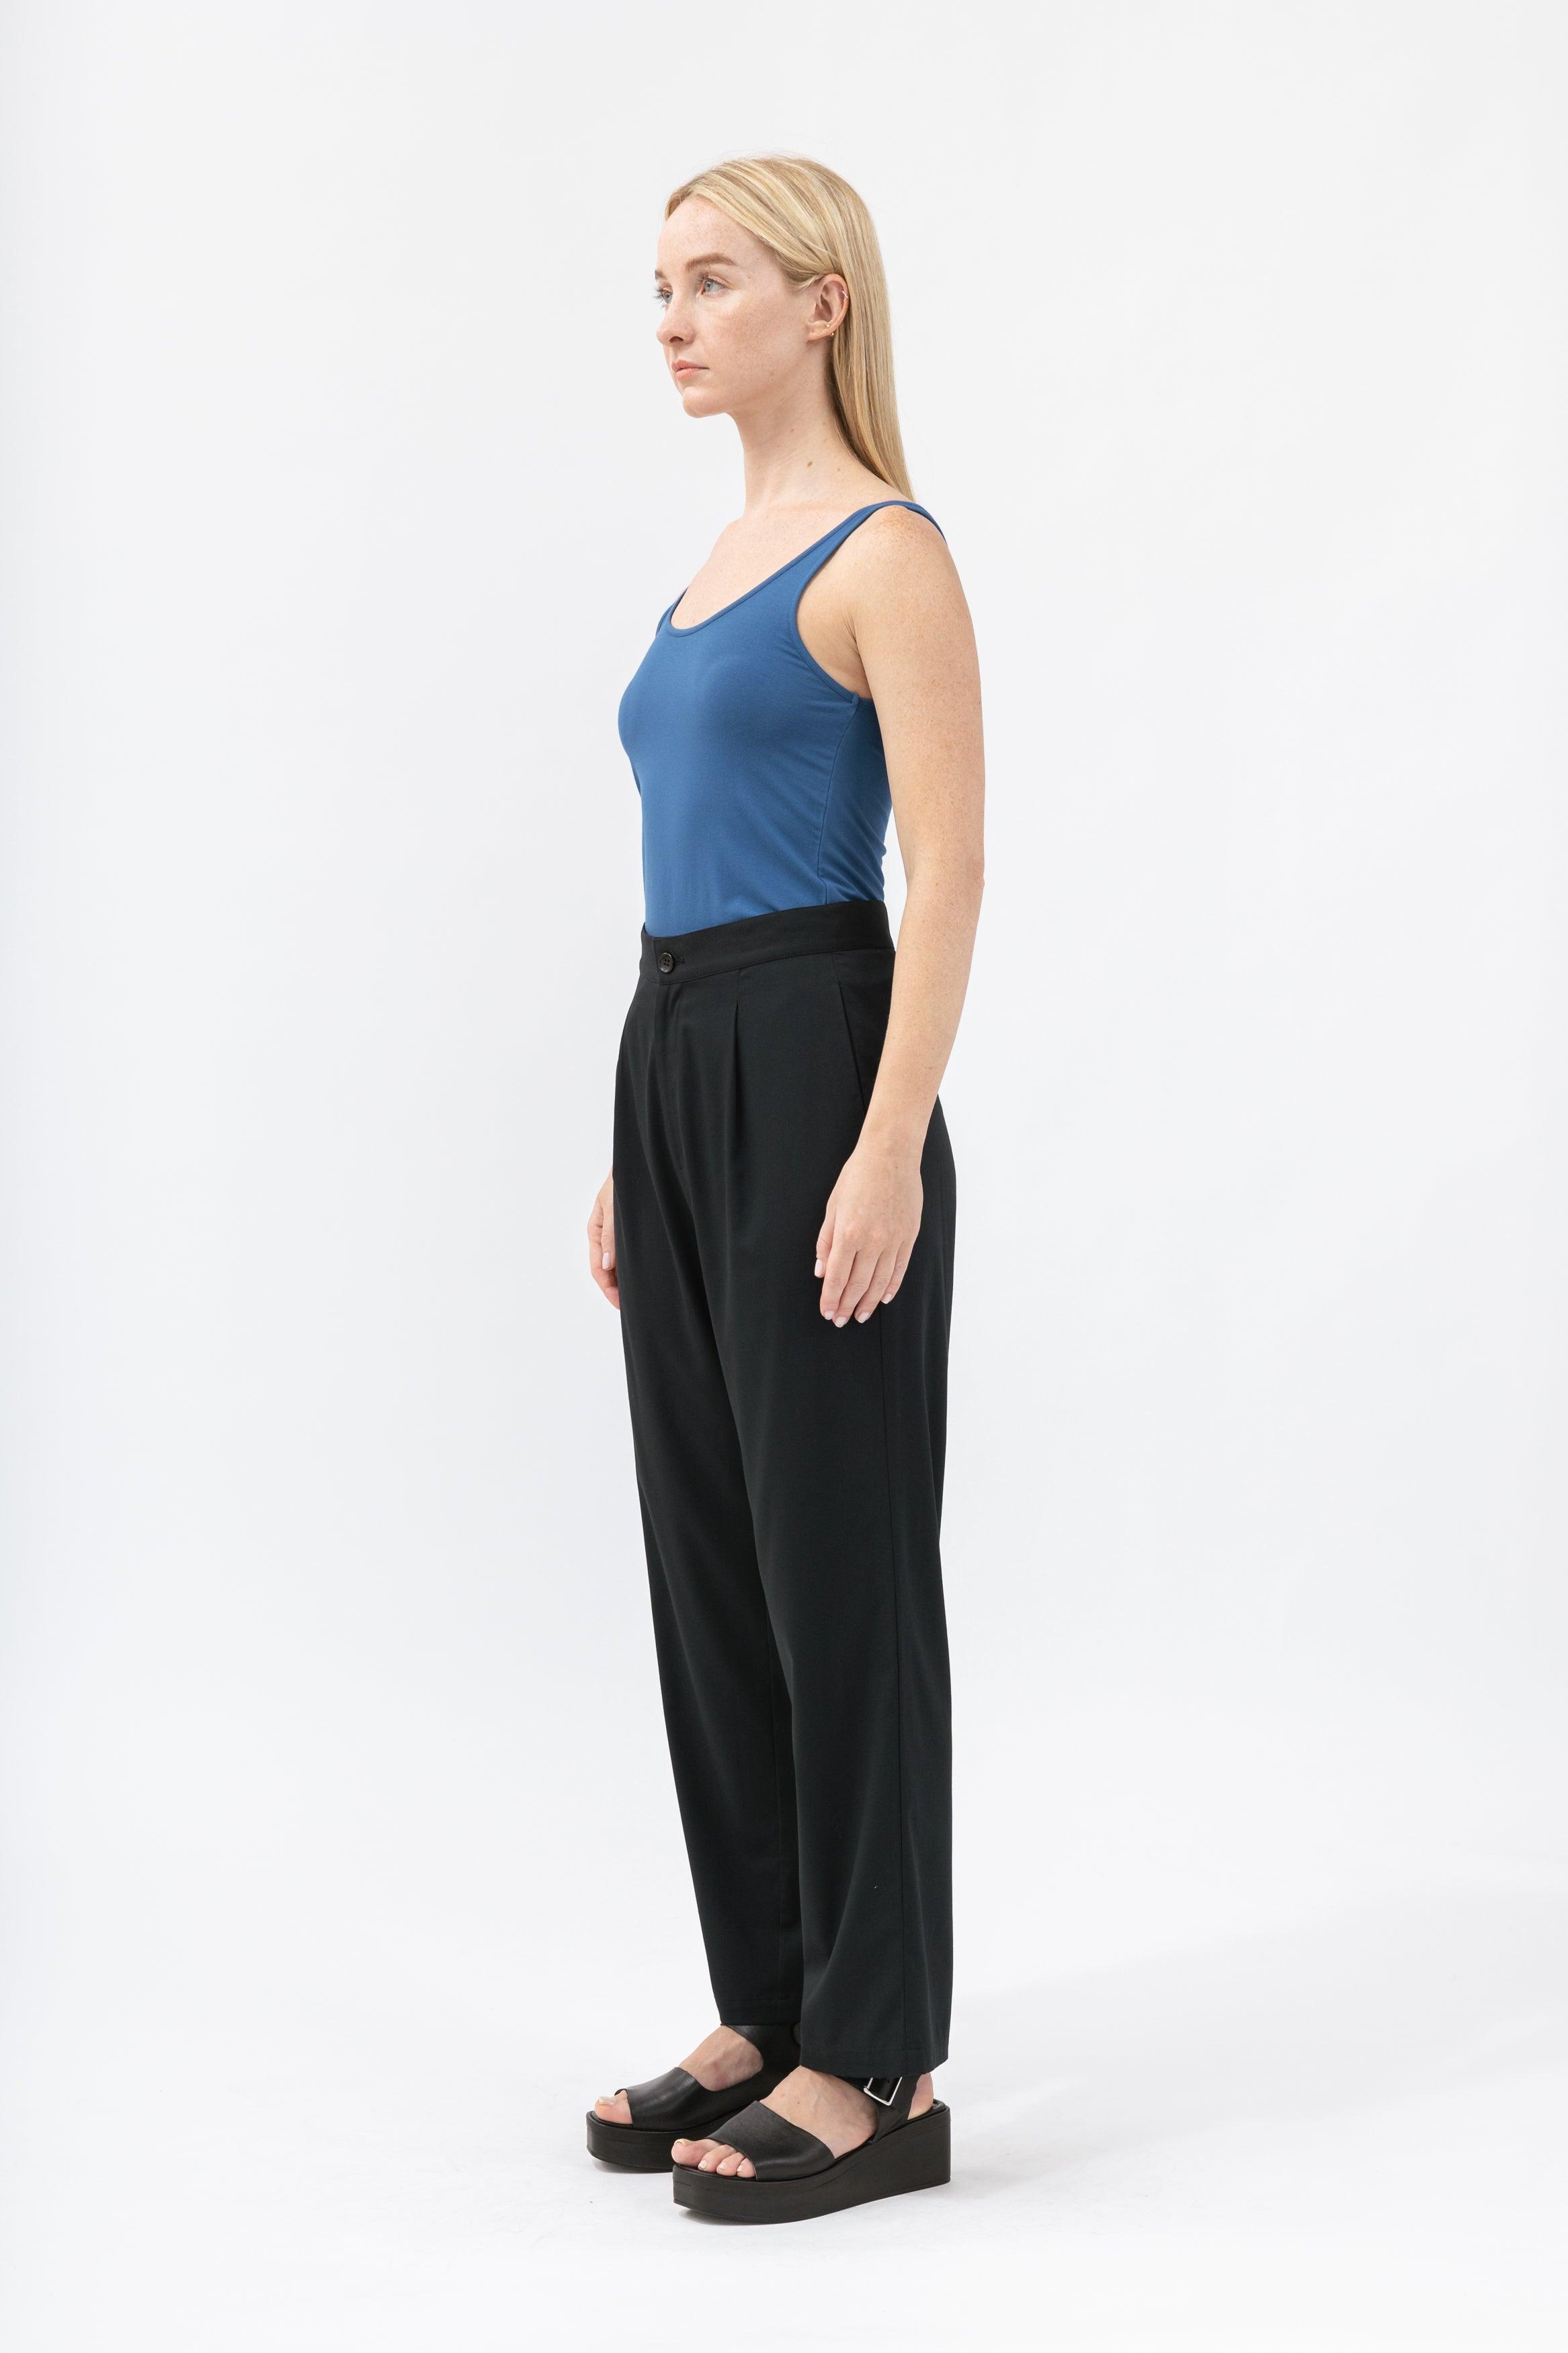 Women's Tapered Pants - NOT LABELED